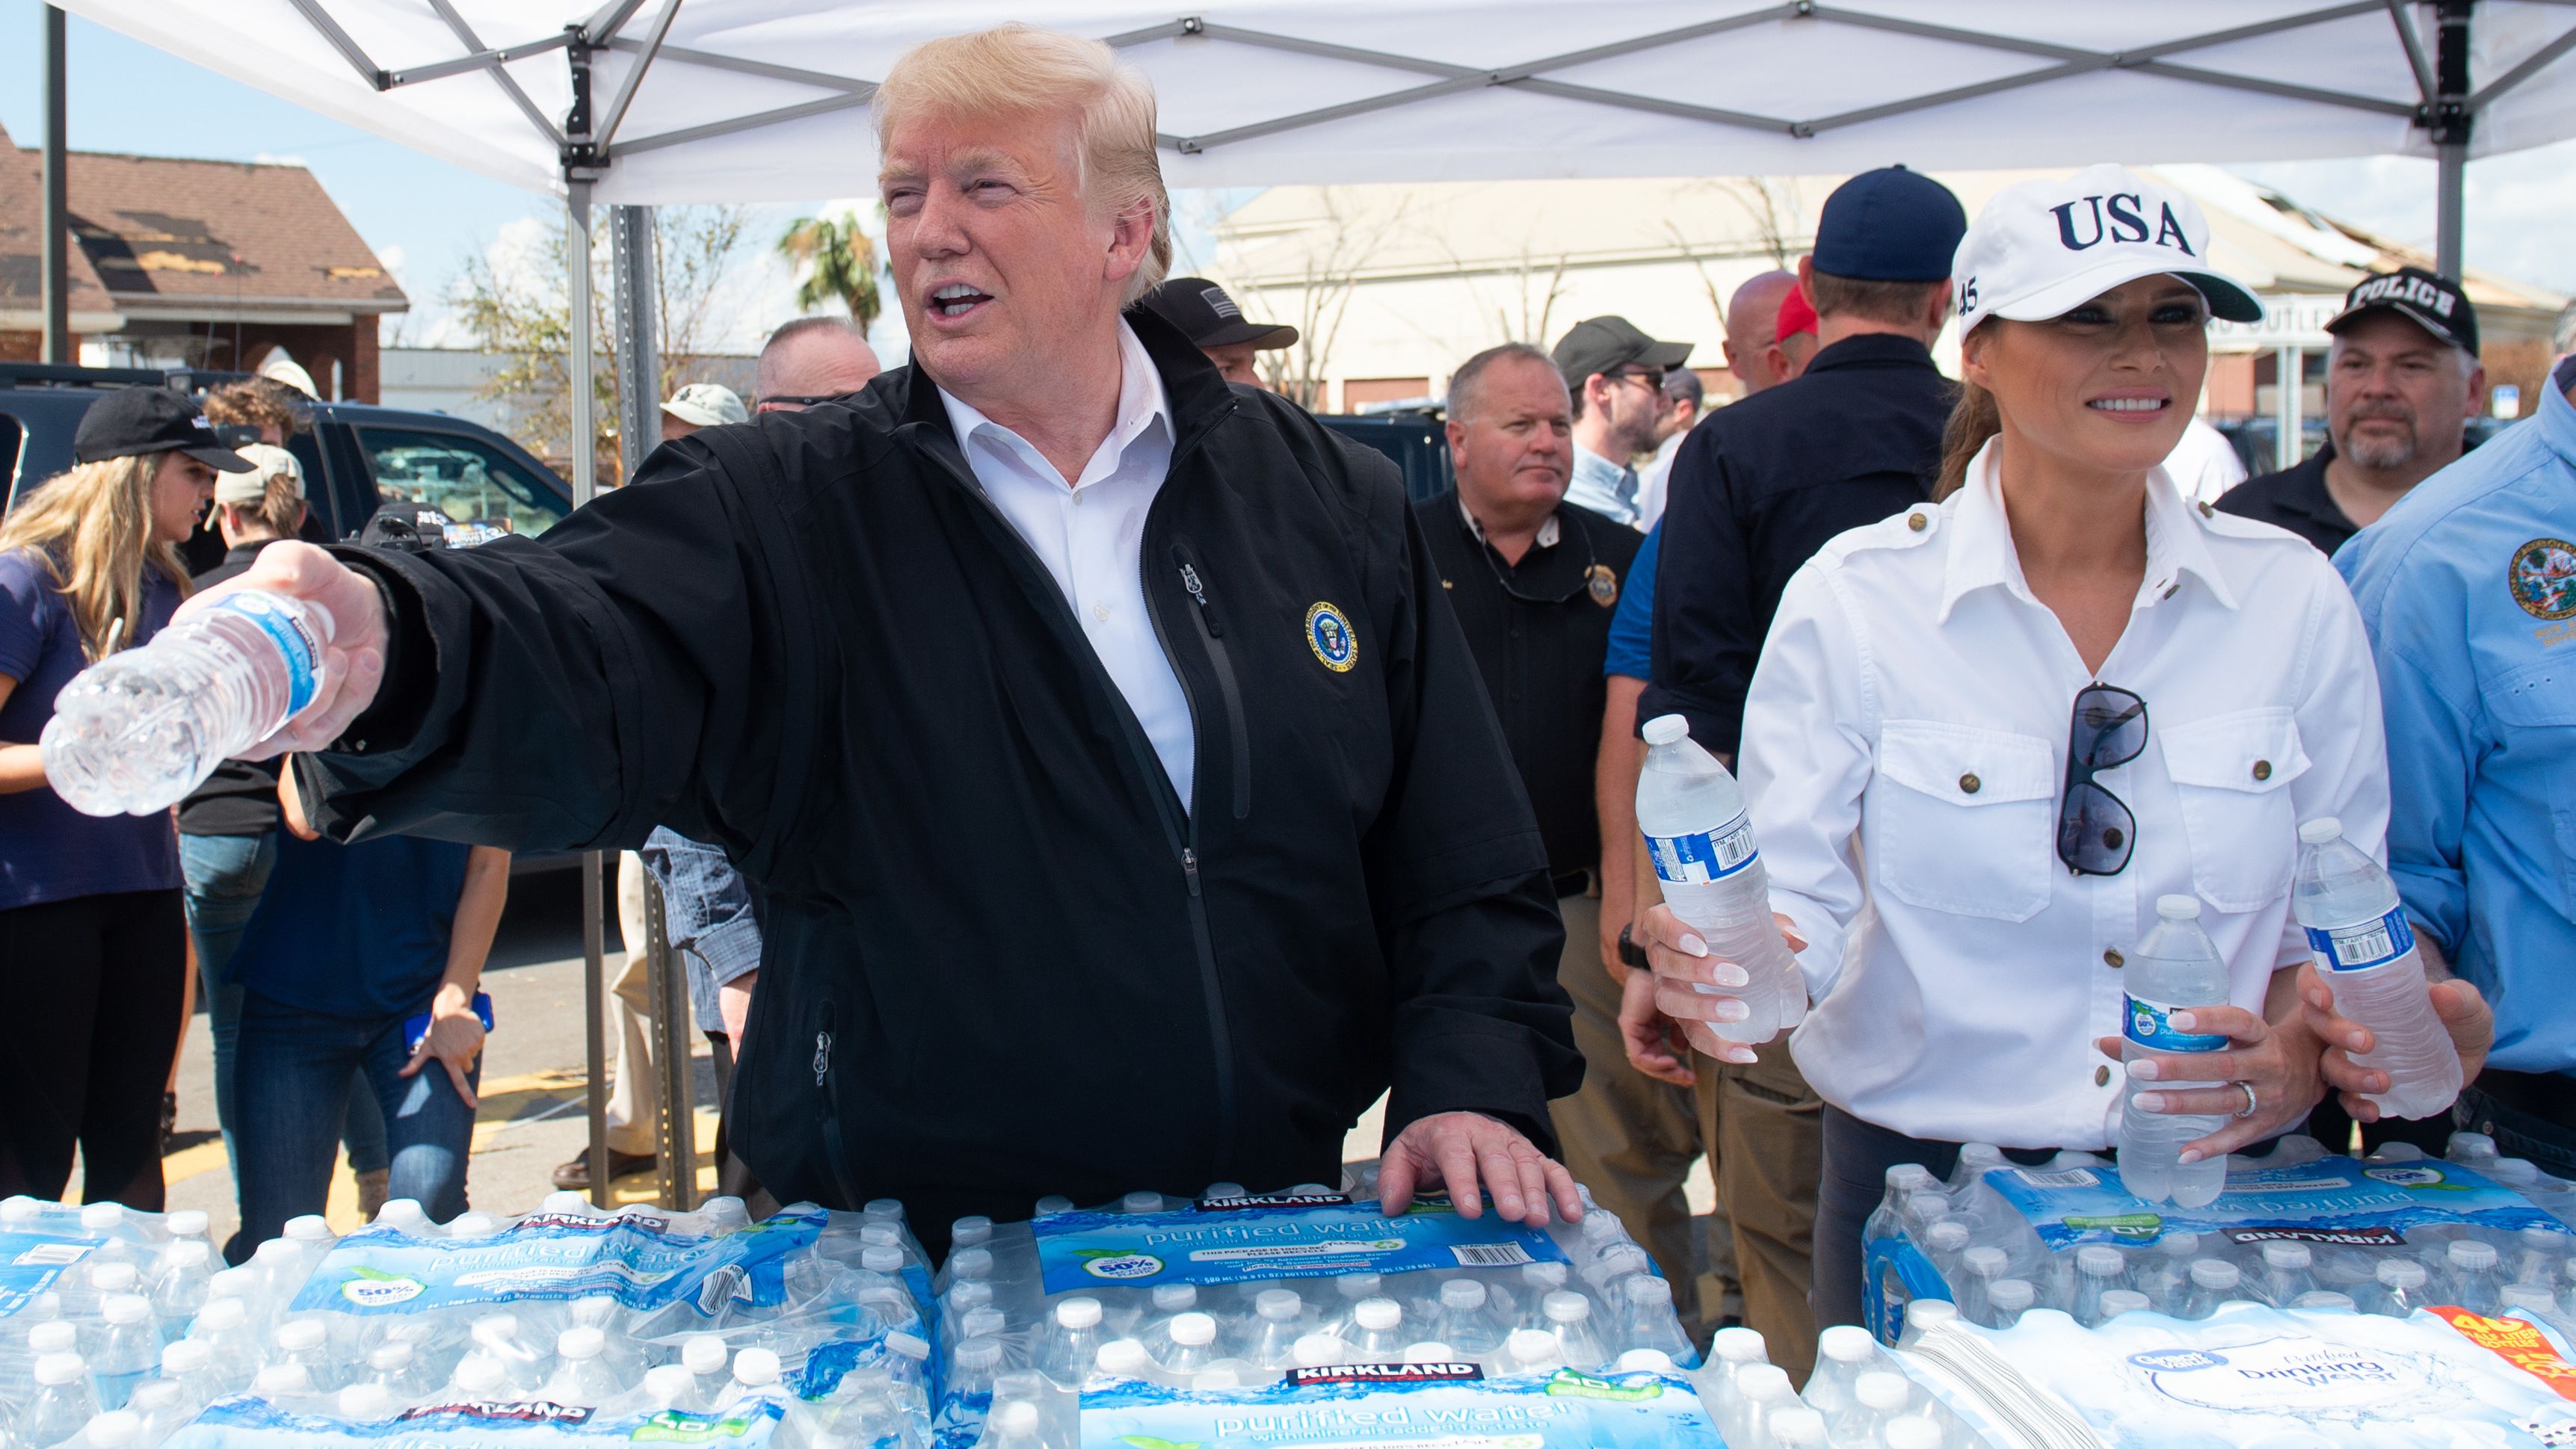 The President and first lady hand out bottles of water to people in Lynn Haven on October 15.